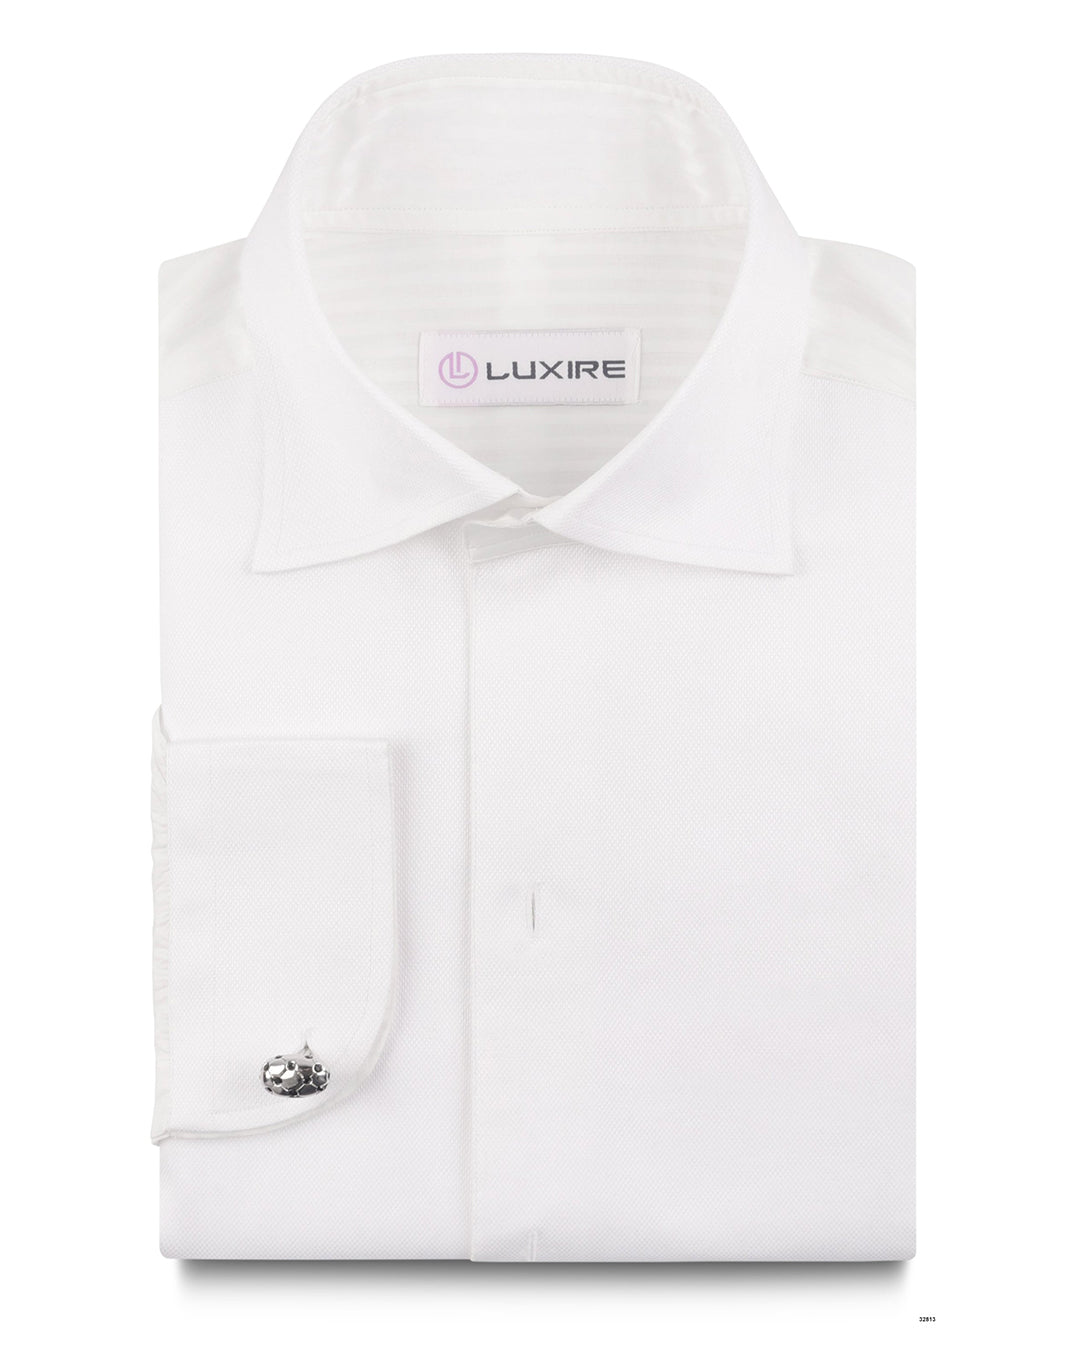 Front of the mens tuxedo shirt by Luxire in white